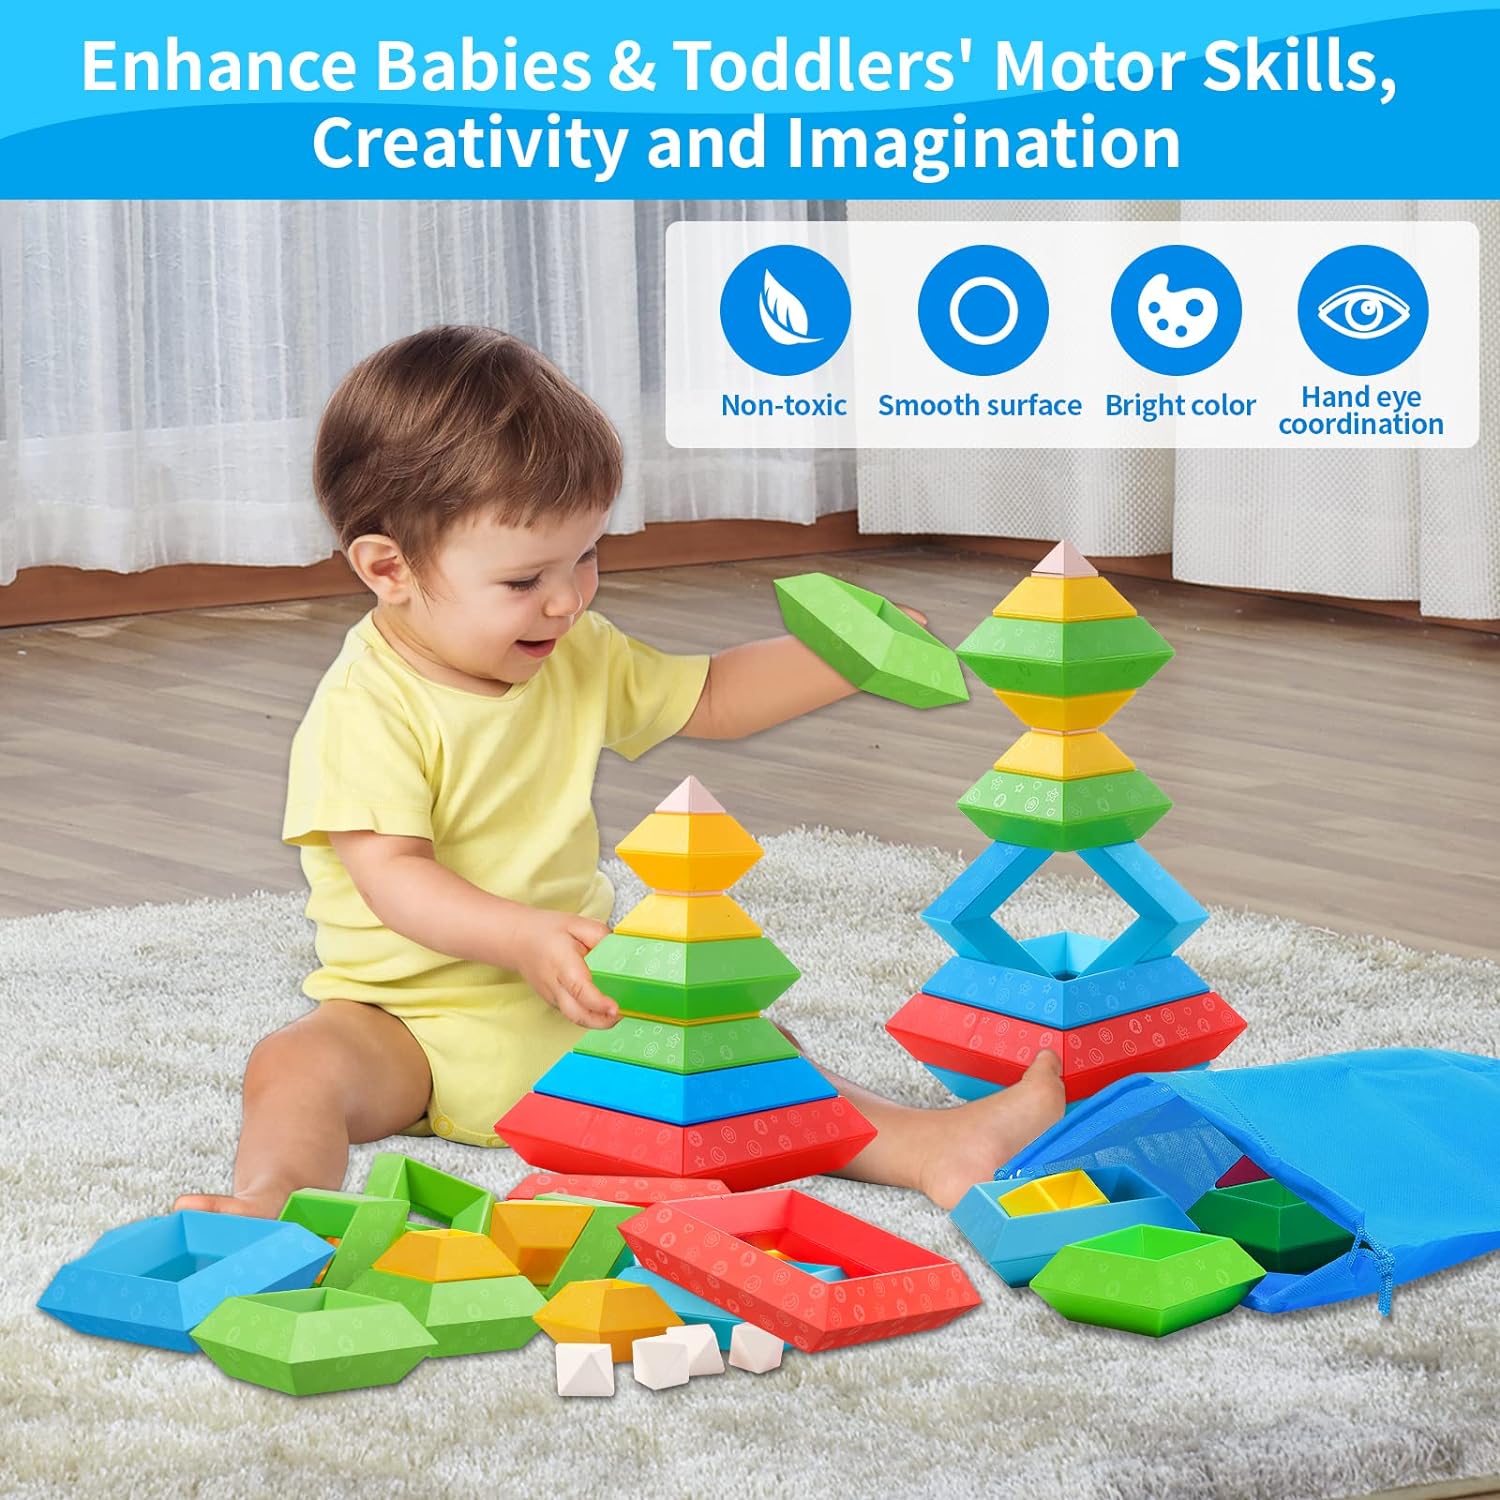 Hieoby Montessori Toys for 1 2 3 4 5 Year Old Boys Girls Toddlers Preschool Learning Activities 30Pcs Building Blocks Stacking Educational Toys STEM Sensory Toys Gifts for Kids Age 1-2 2-4,Blue